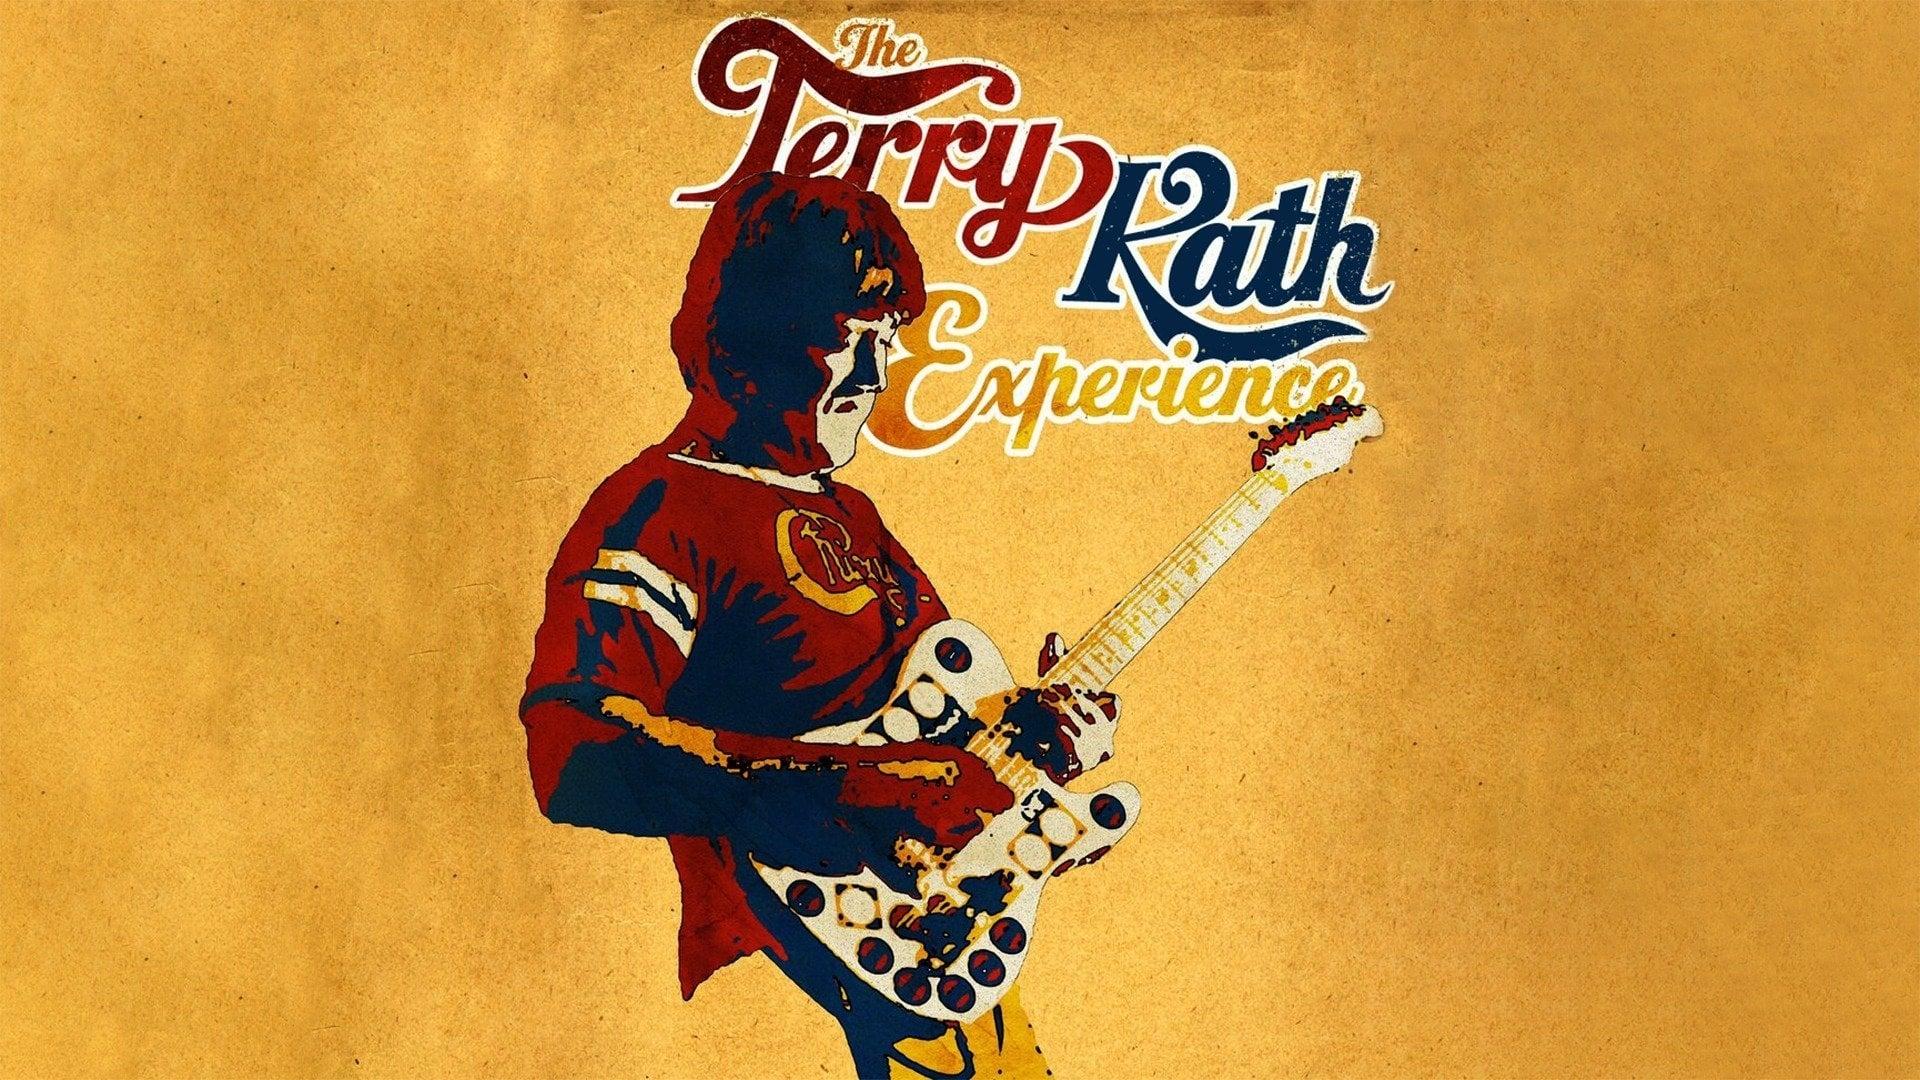 The Terry Kath Experience backdrop